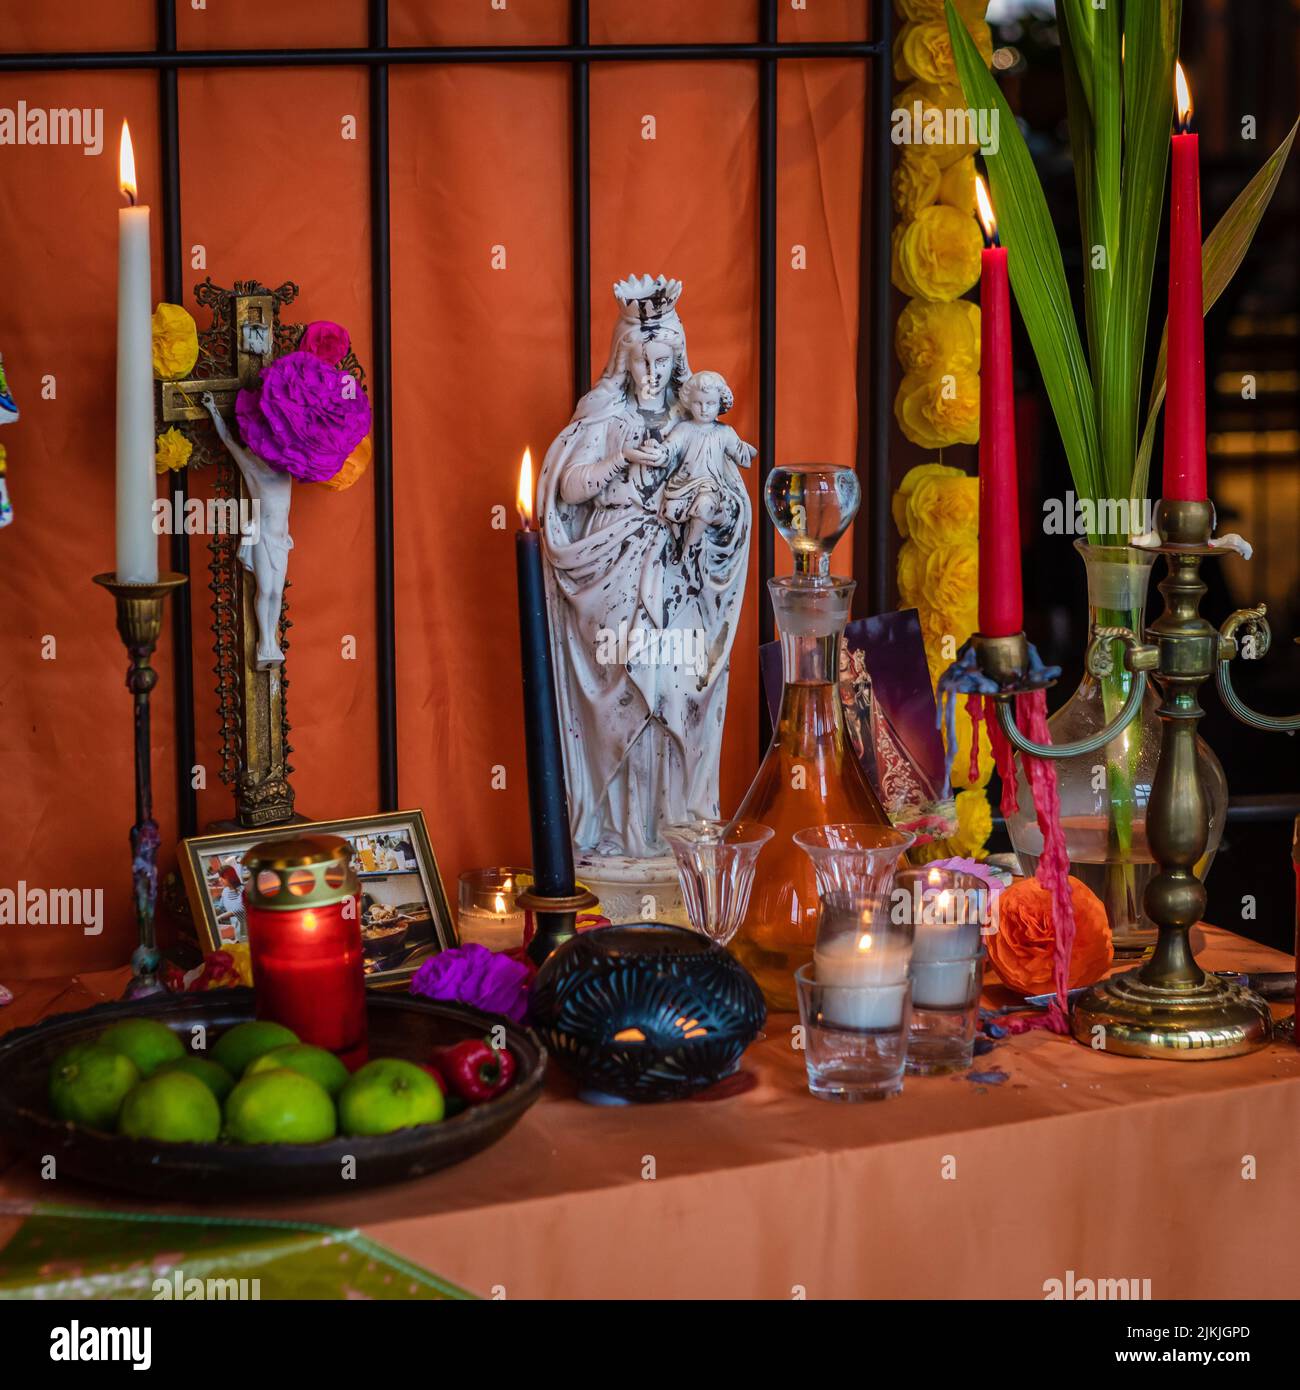 A setup of Dia De Los Muertos decor with candles and a statue of Saint Mary Stock Photo